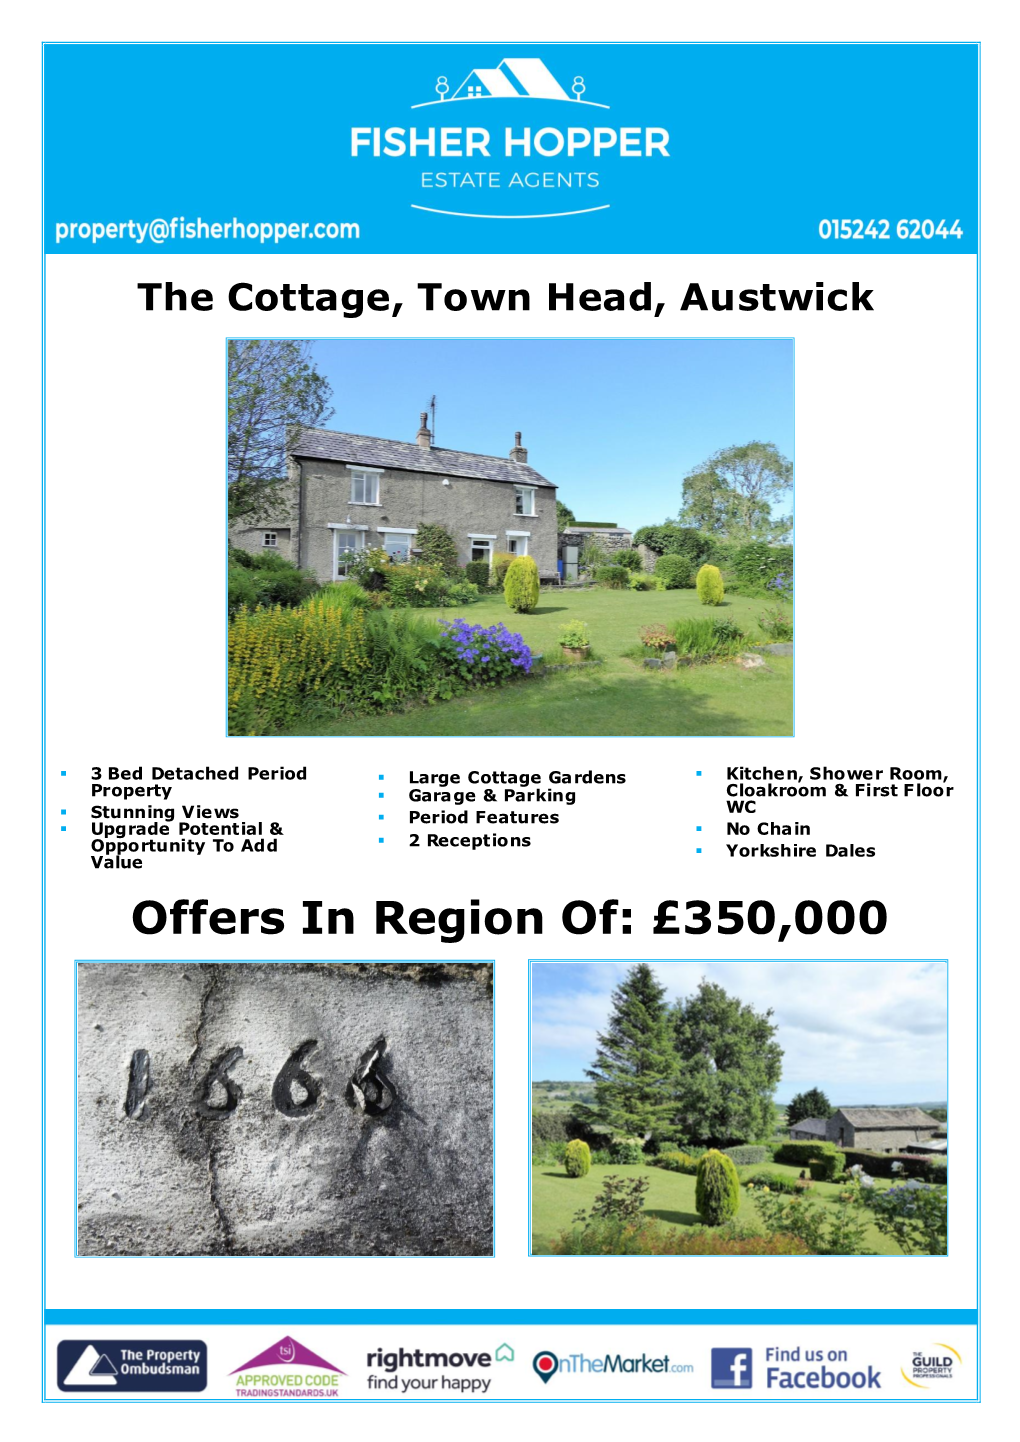 The Cottage, Town Head, Austwick Offers in Region Of: £350000